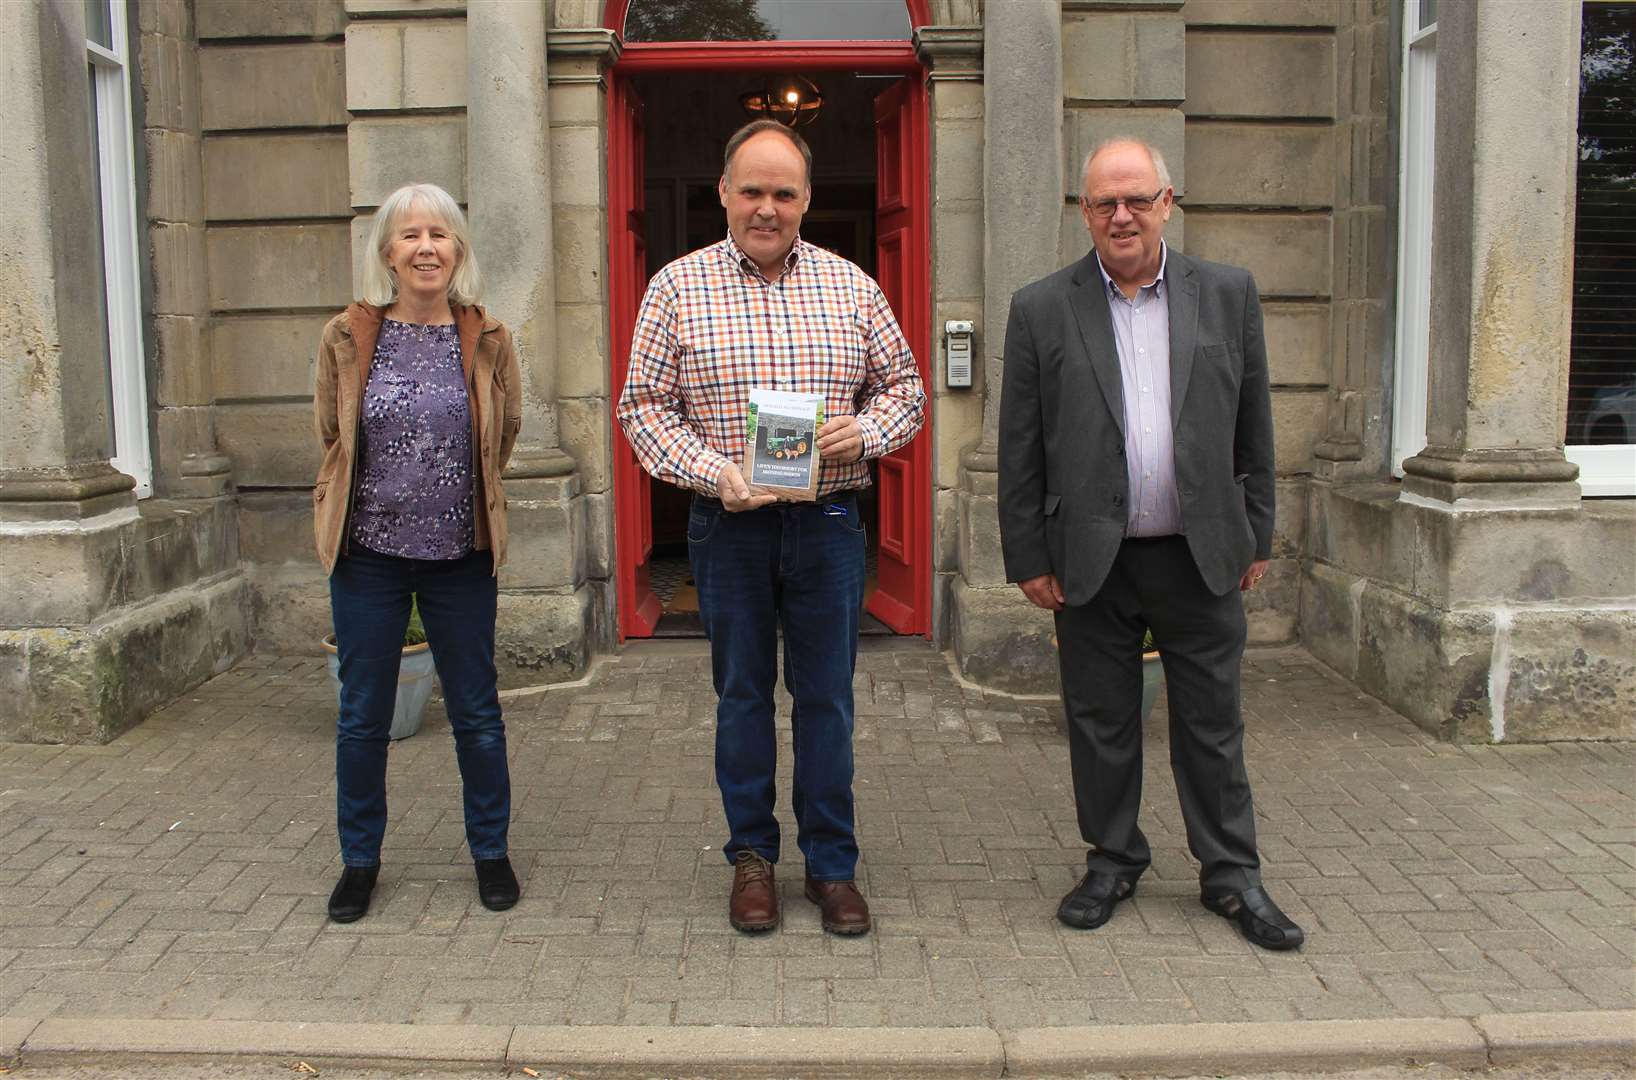 Donald MacDonald (centre) with Chris Nicolson and Ian Leith outside the Manor House hotel in Thurso where Life’s Too Short for Ironing Shirts was launched. Picture: Alan Hendry